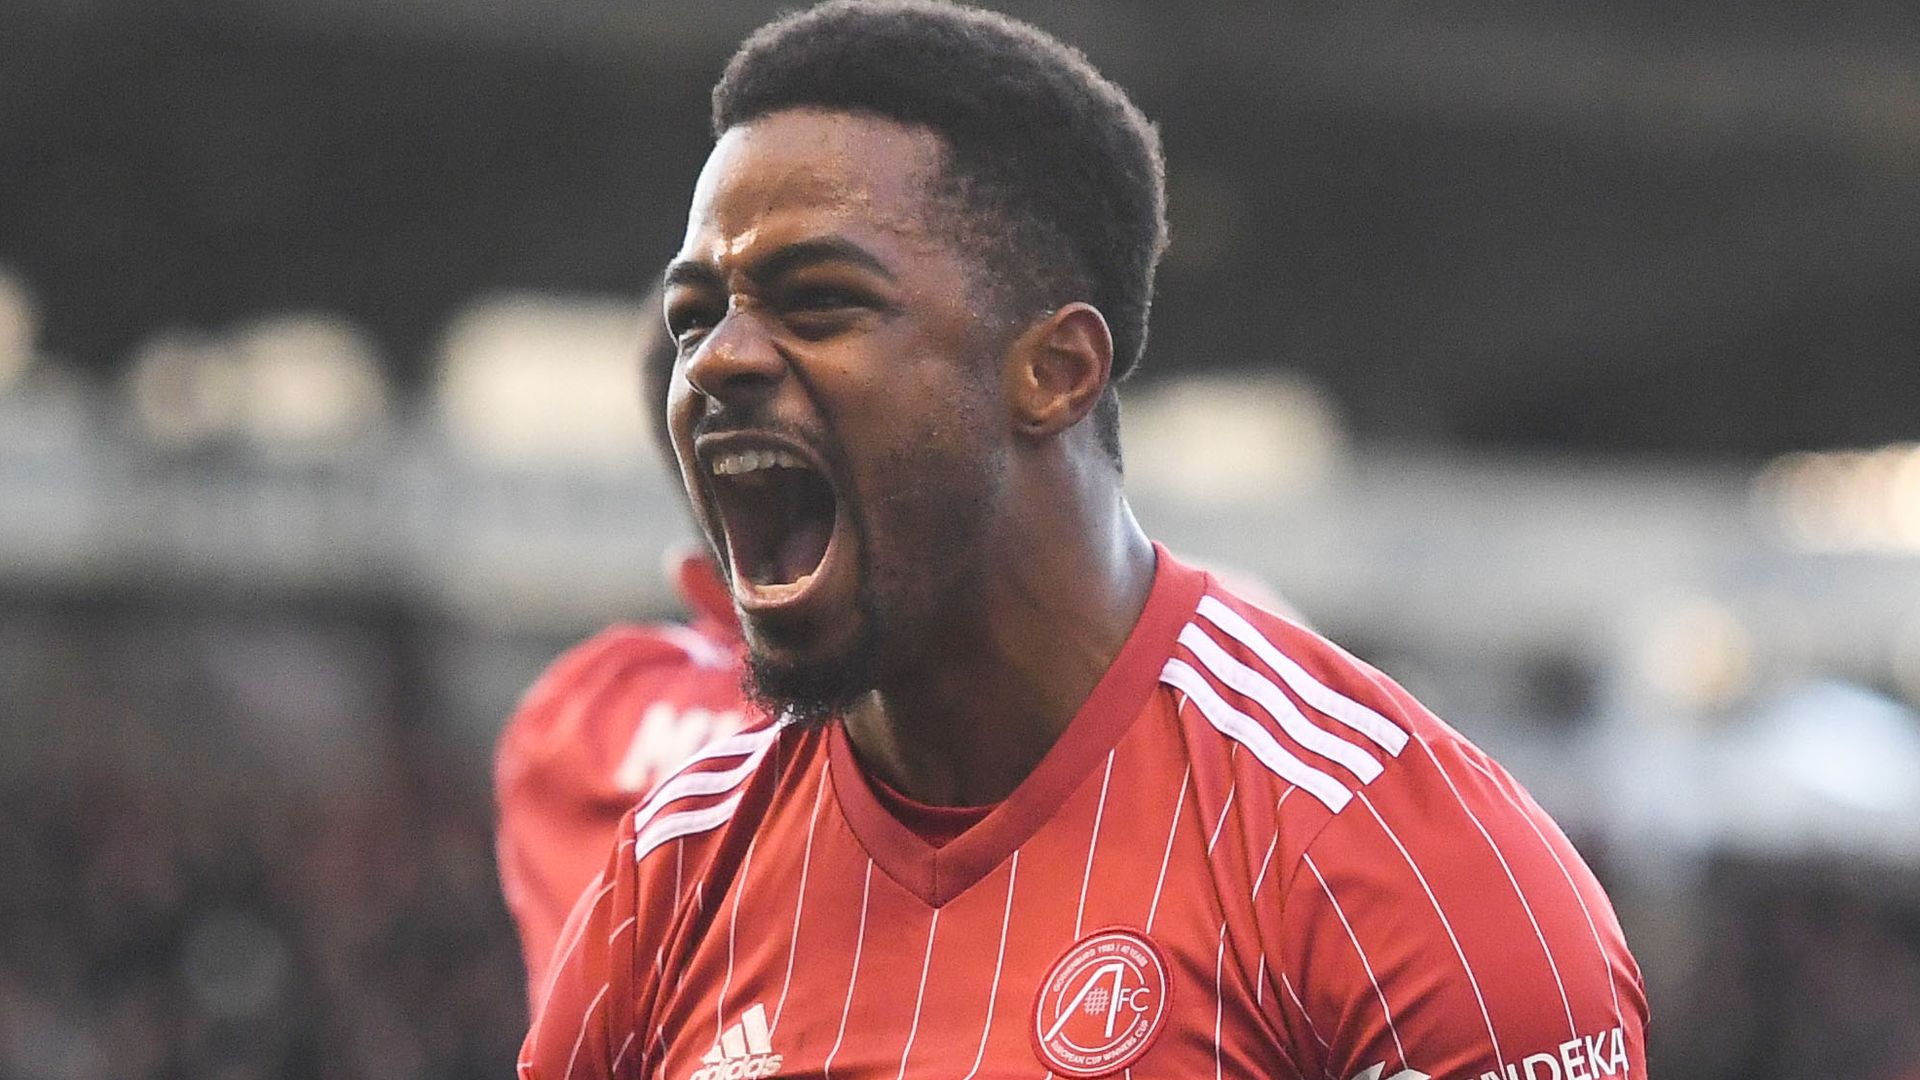 Aberdeen 2-0 St Johnstone: Luis ‘Duk’ Lopes’ second-half double ends Dons’ five-game winless run